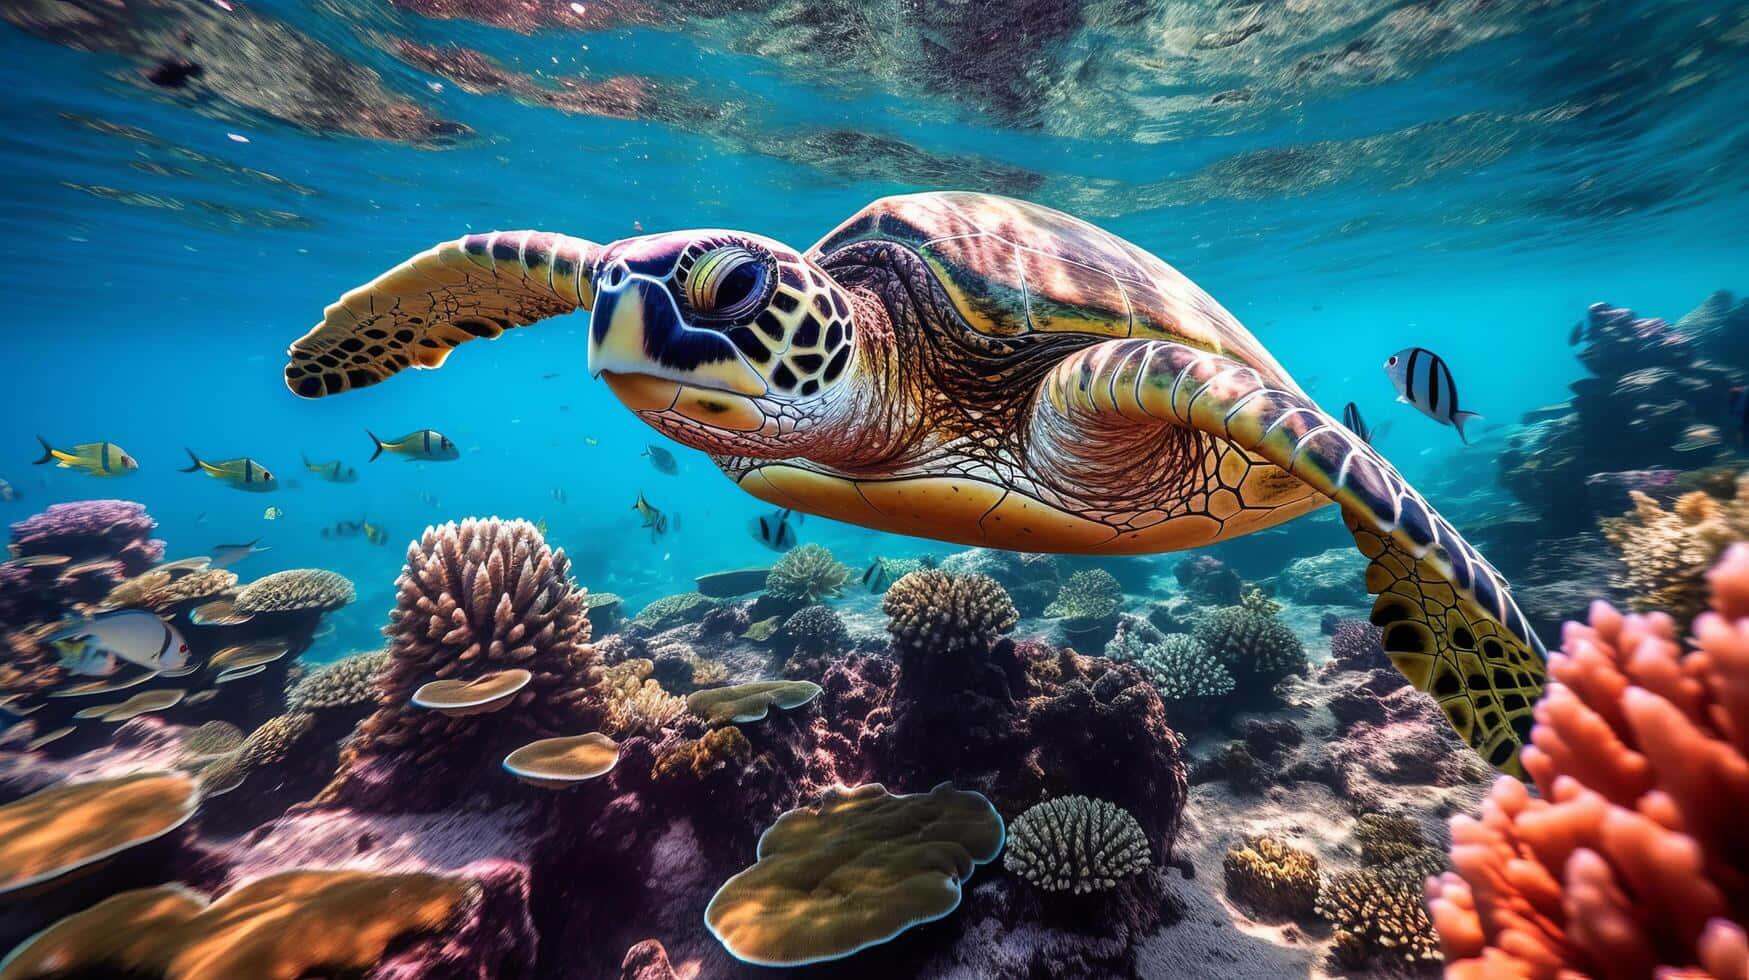 Green Sea Turtle Swimming Over Coral Reef Wallpaper